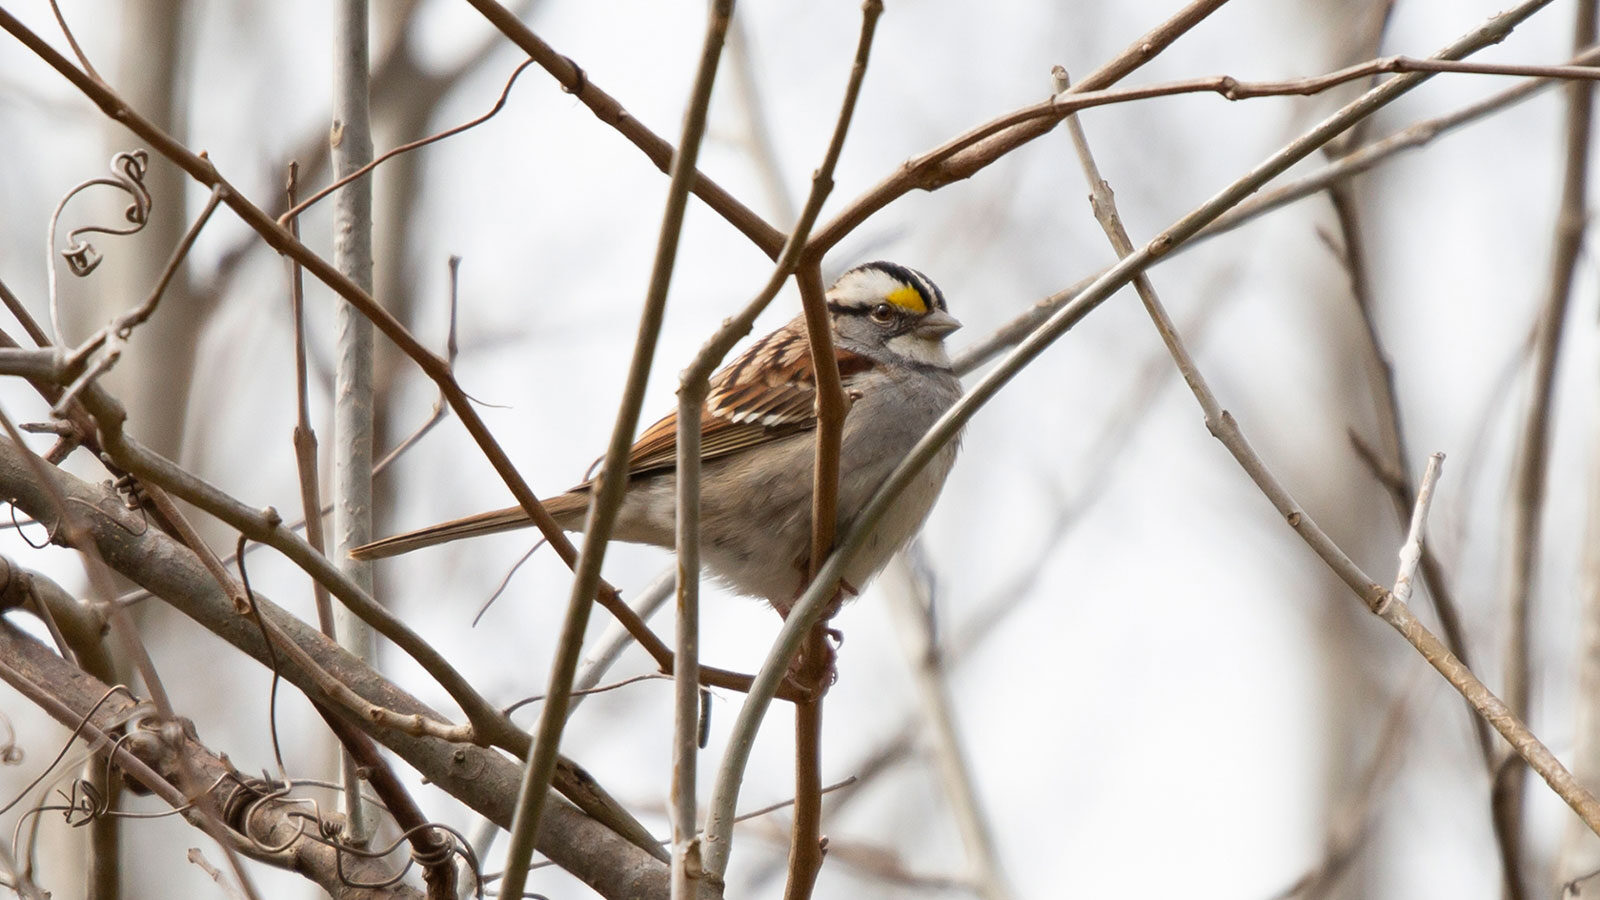 White-throated sparrow looking out from a branch on a gray day